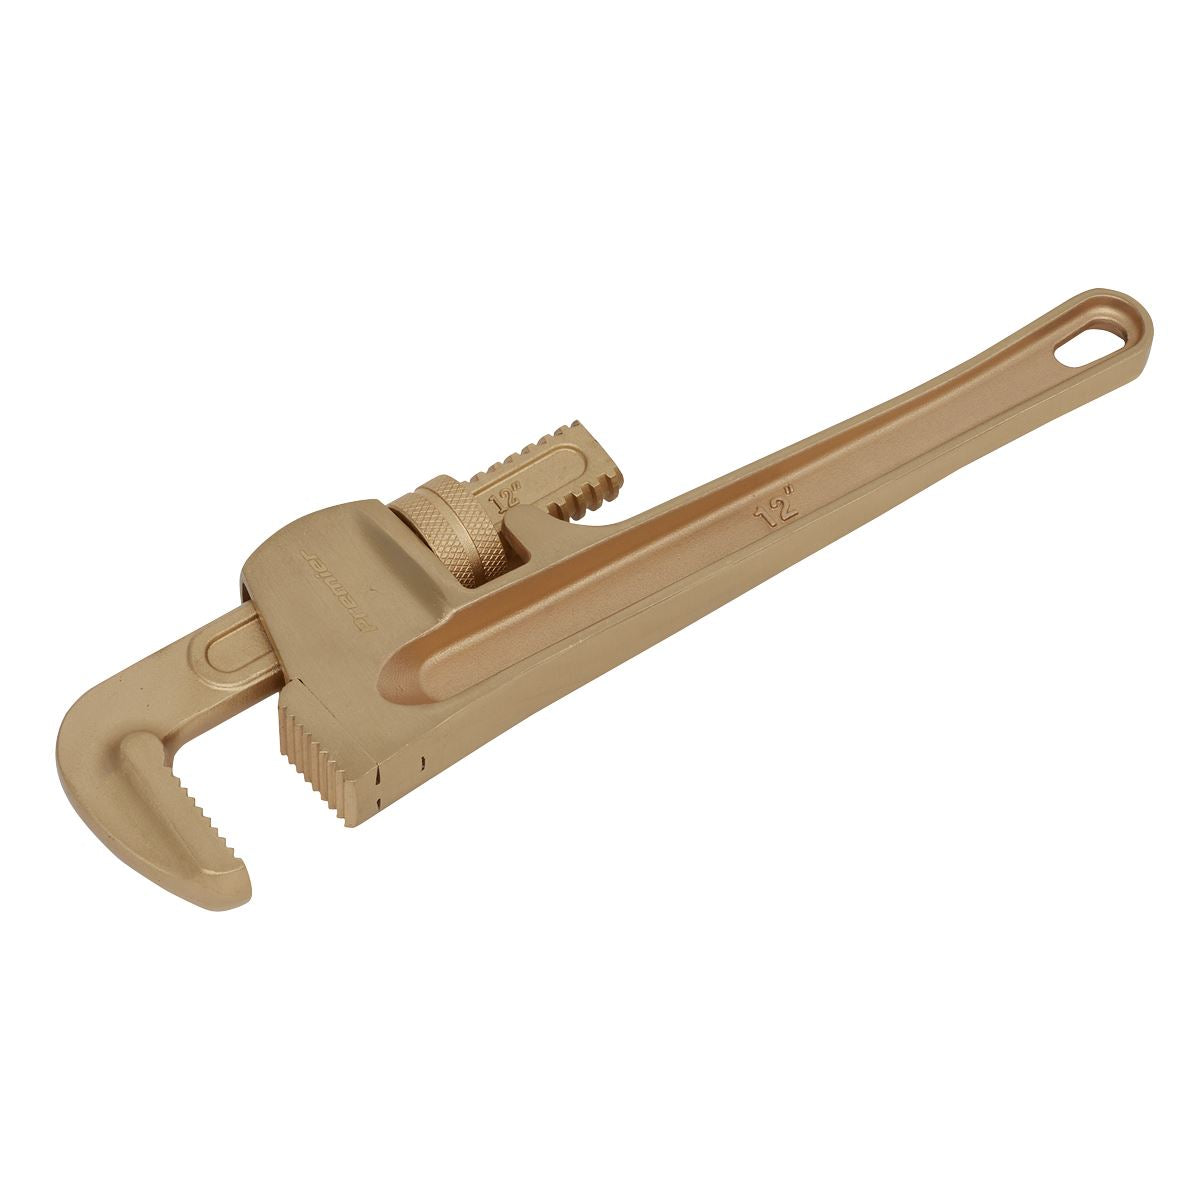 Sealey Premier Pipe Wrench 300mm - Non-Sparking